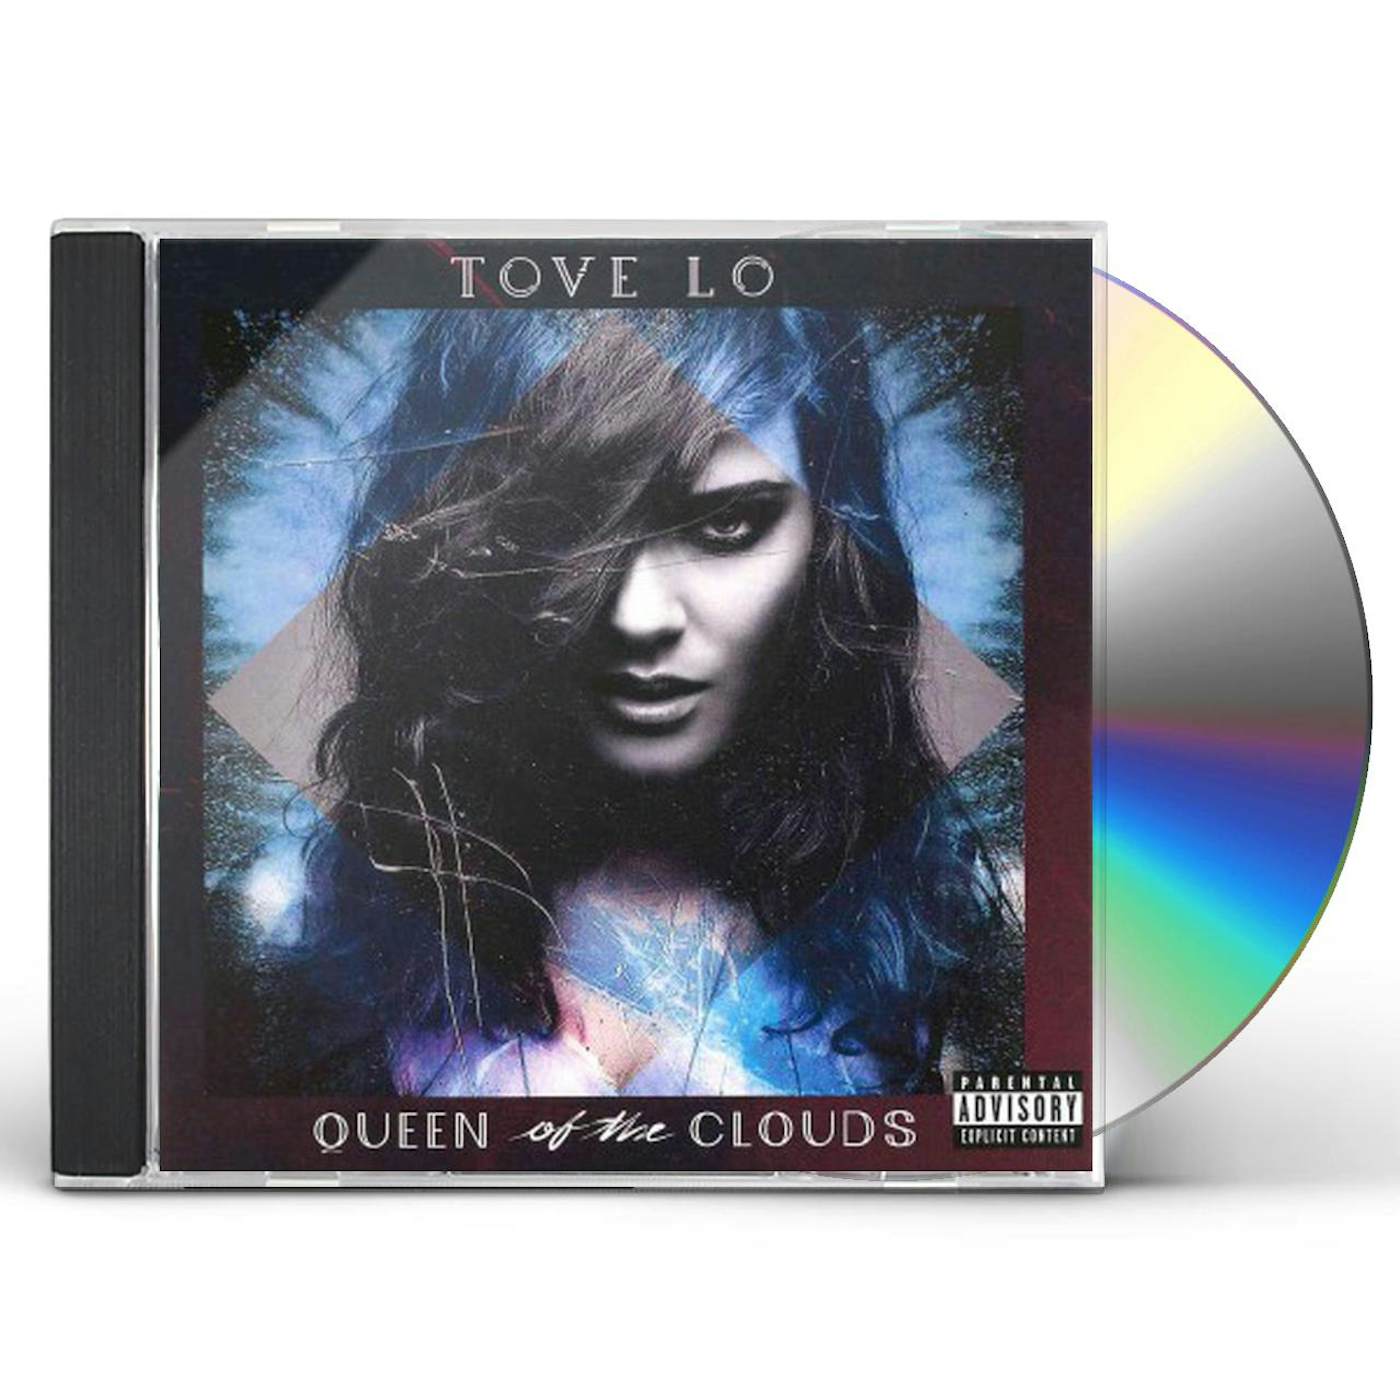 Tove Lo QUEEN OF THE CLOUDS CD